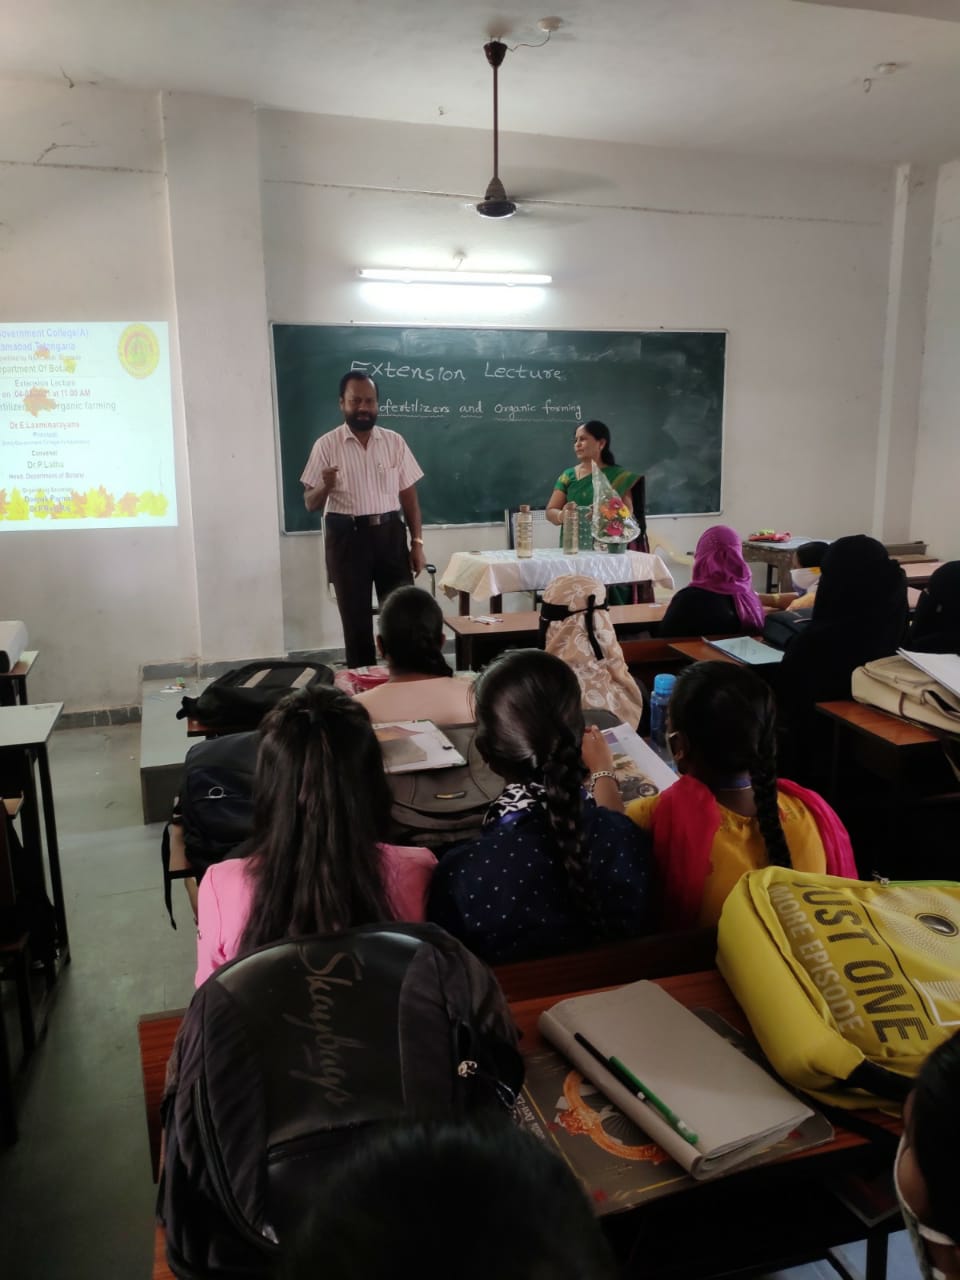 Botany 
Extension Lecture on Biofertilizers and Organic Farming
on 4th March 2021
